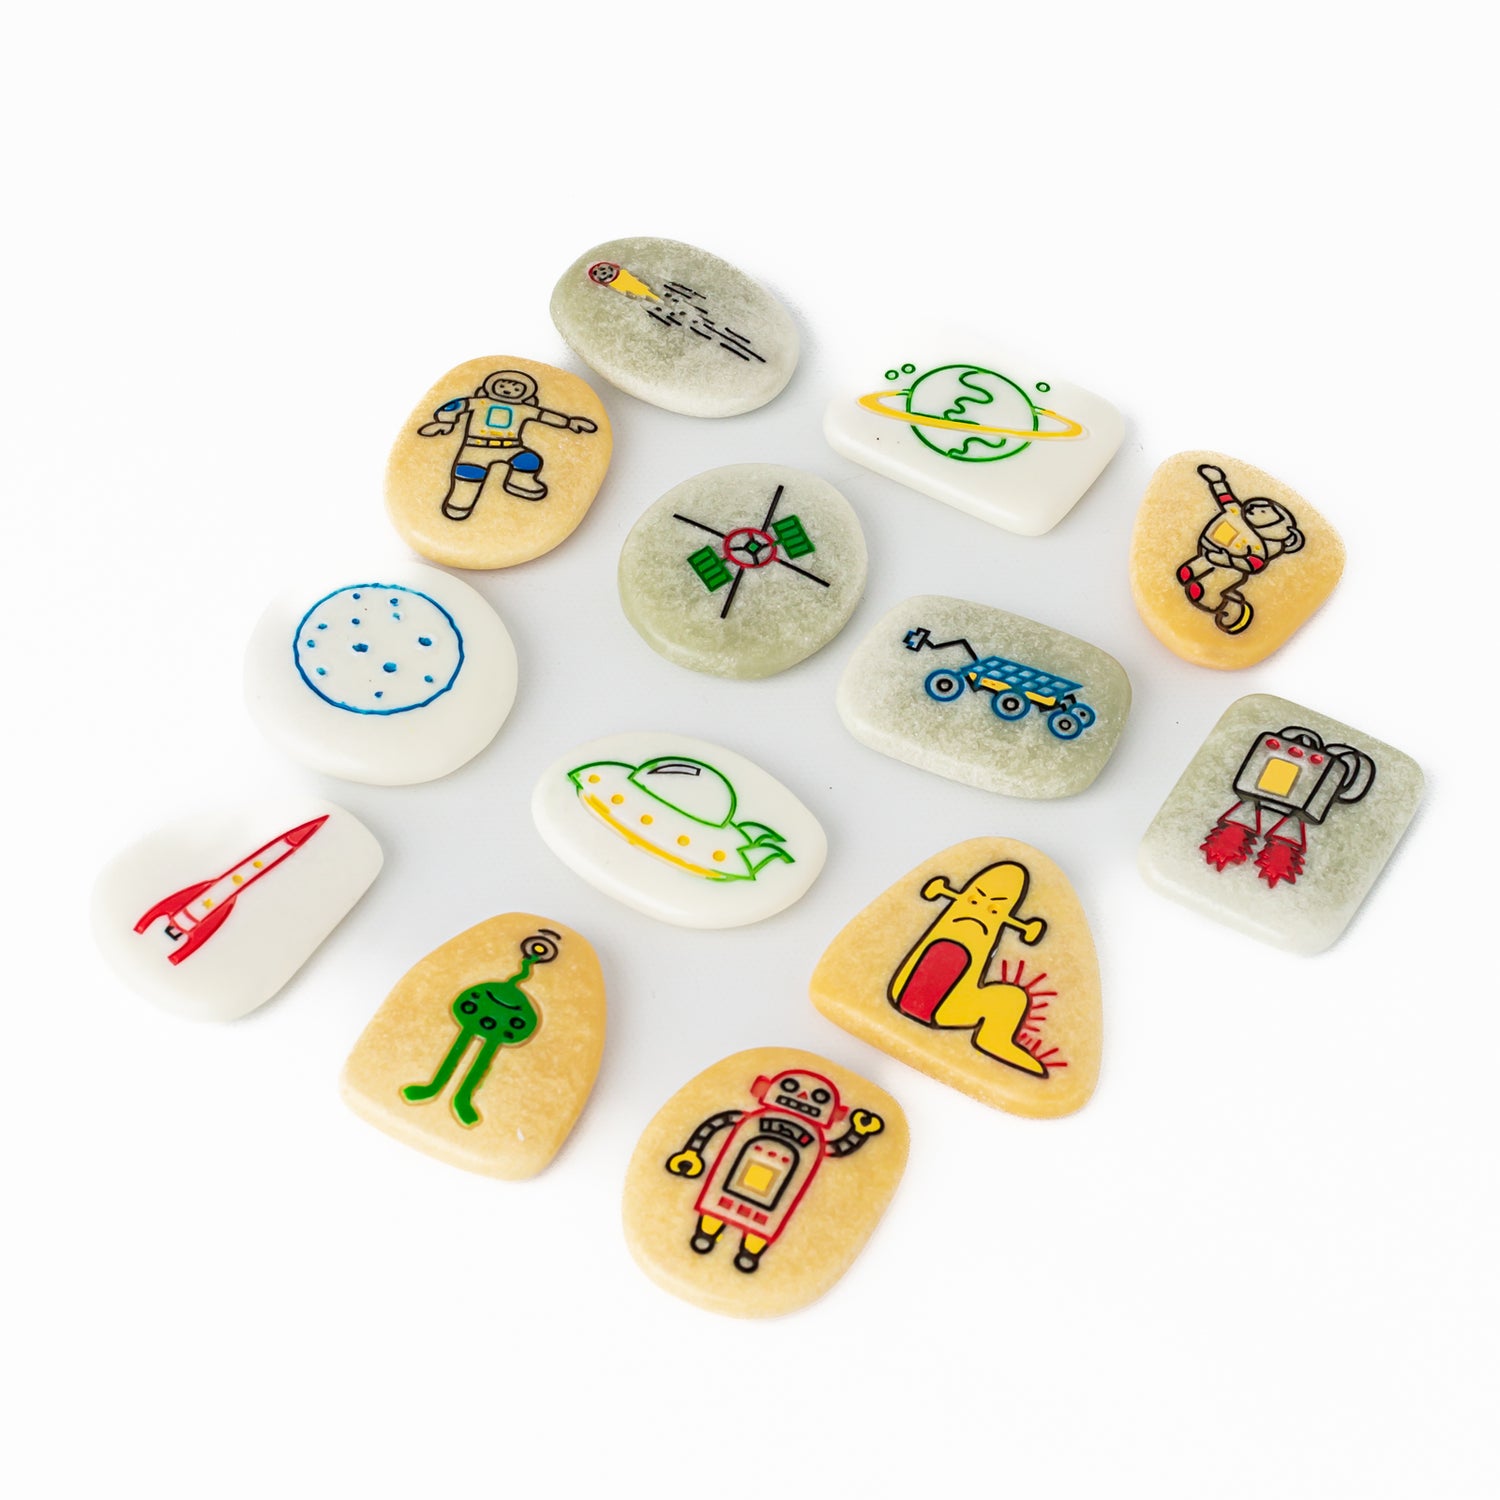 Yellow Door Outer Space Story Stones (Set of 13)